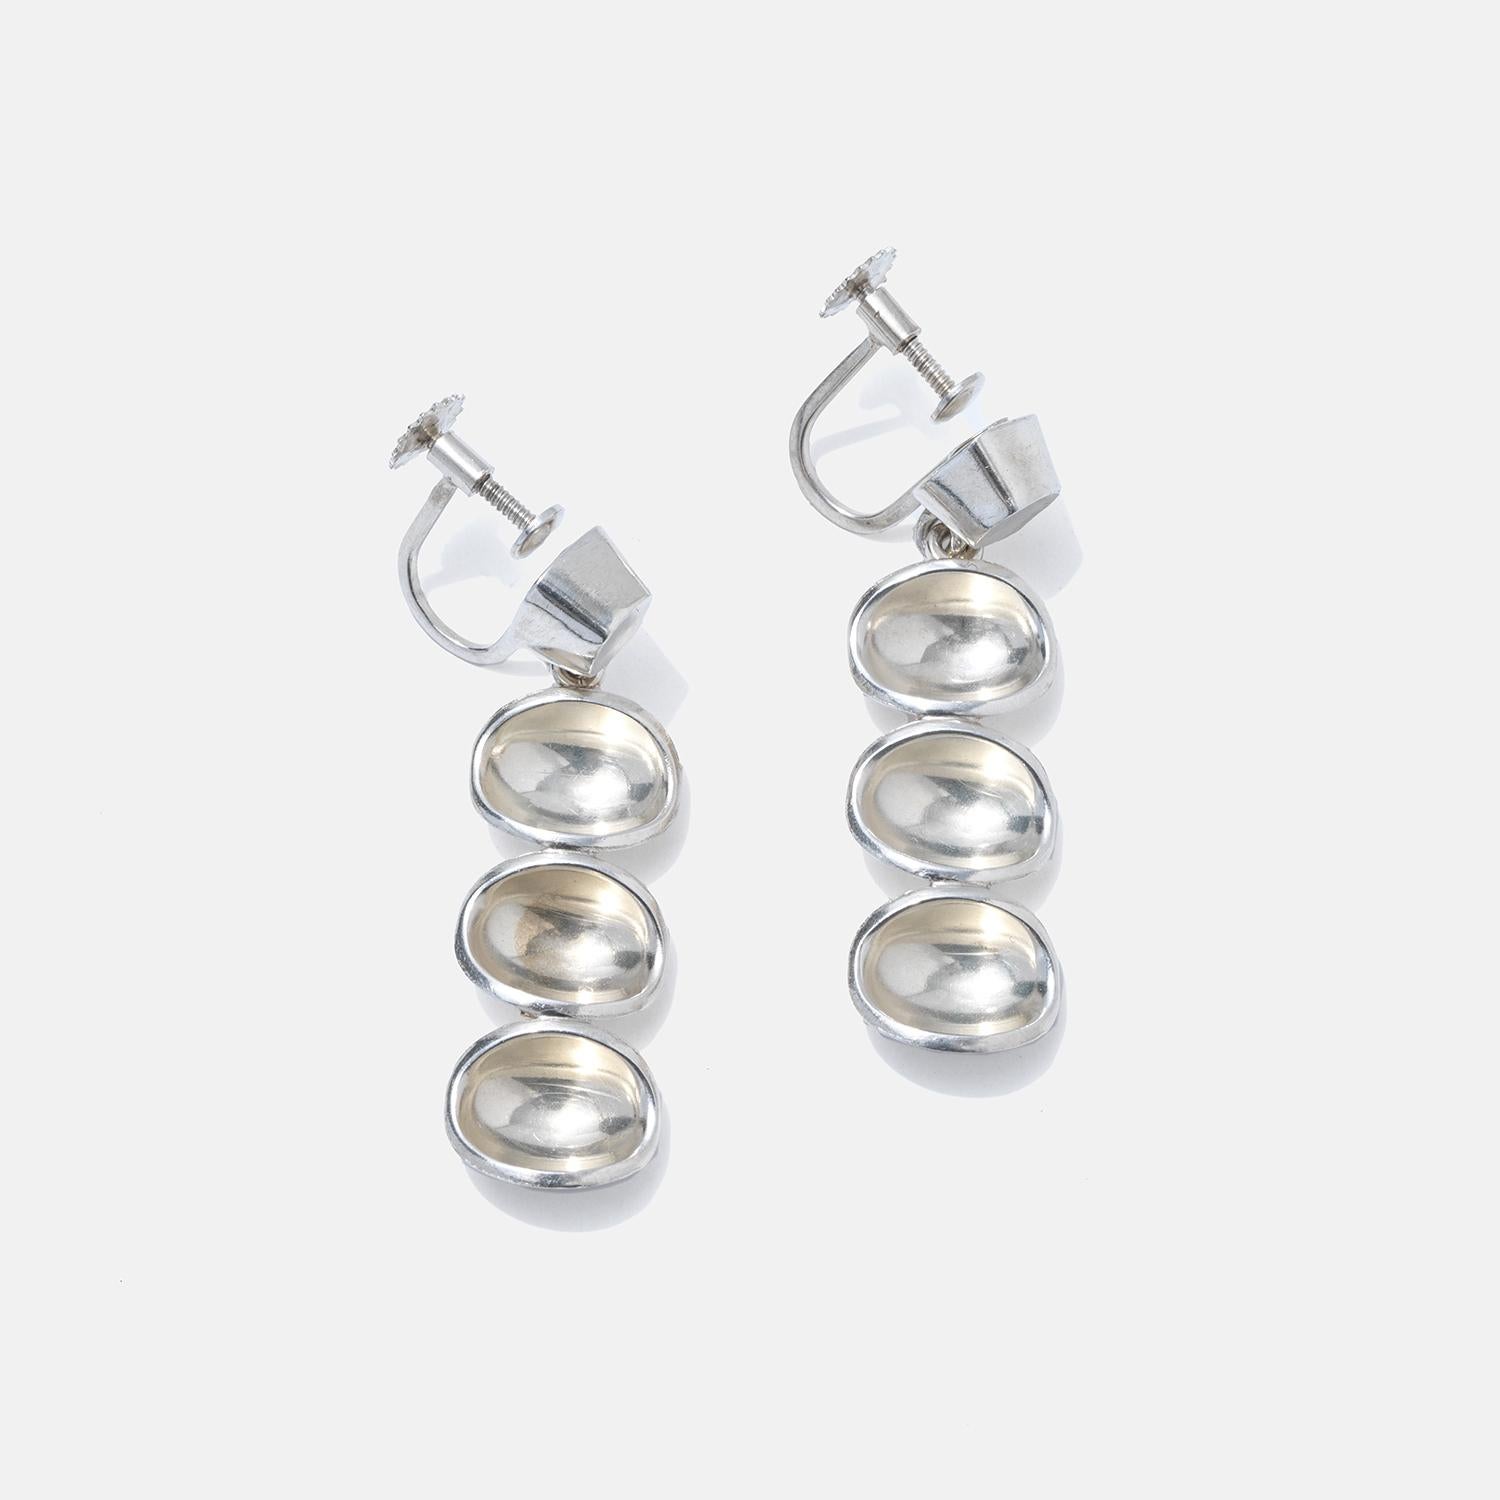 These sterling silver earrings are from the 